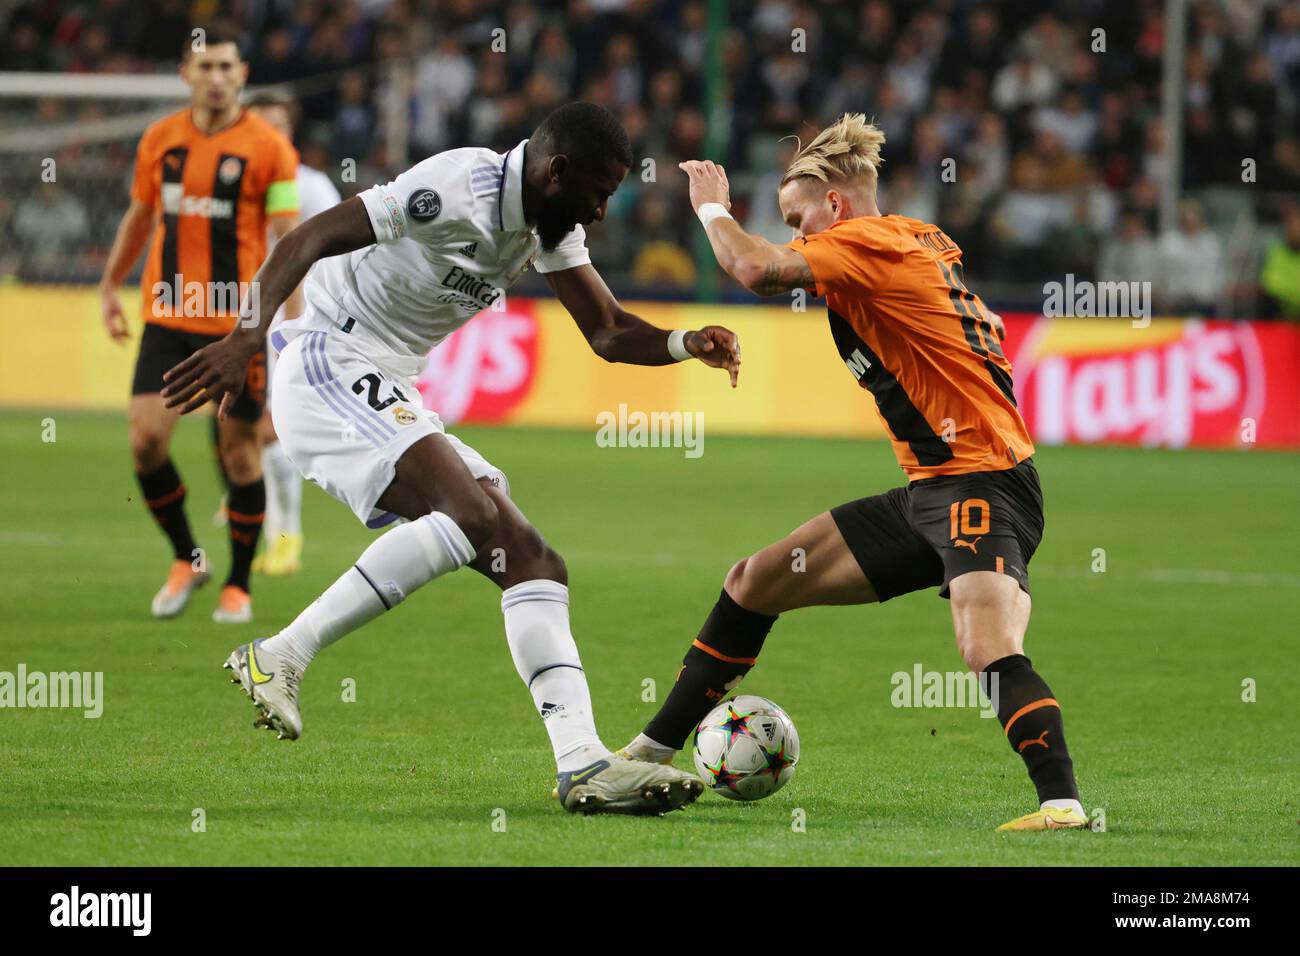 Shakhtar's Mykhaylo Mudryk, right, and Real Madrid's Antonio Rudiger  challenge for the ball during the Champions League group F soccer match  between Shakhtar Donetsk and Real Madrid at Polish Army Stadium stadium